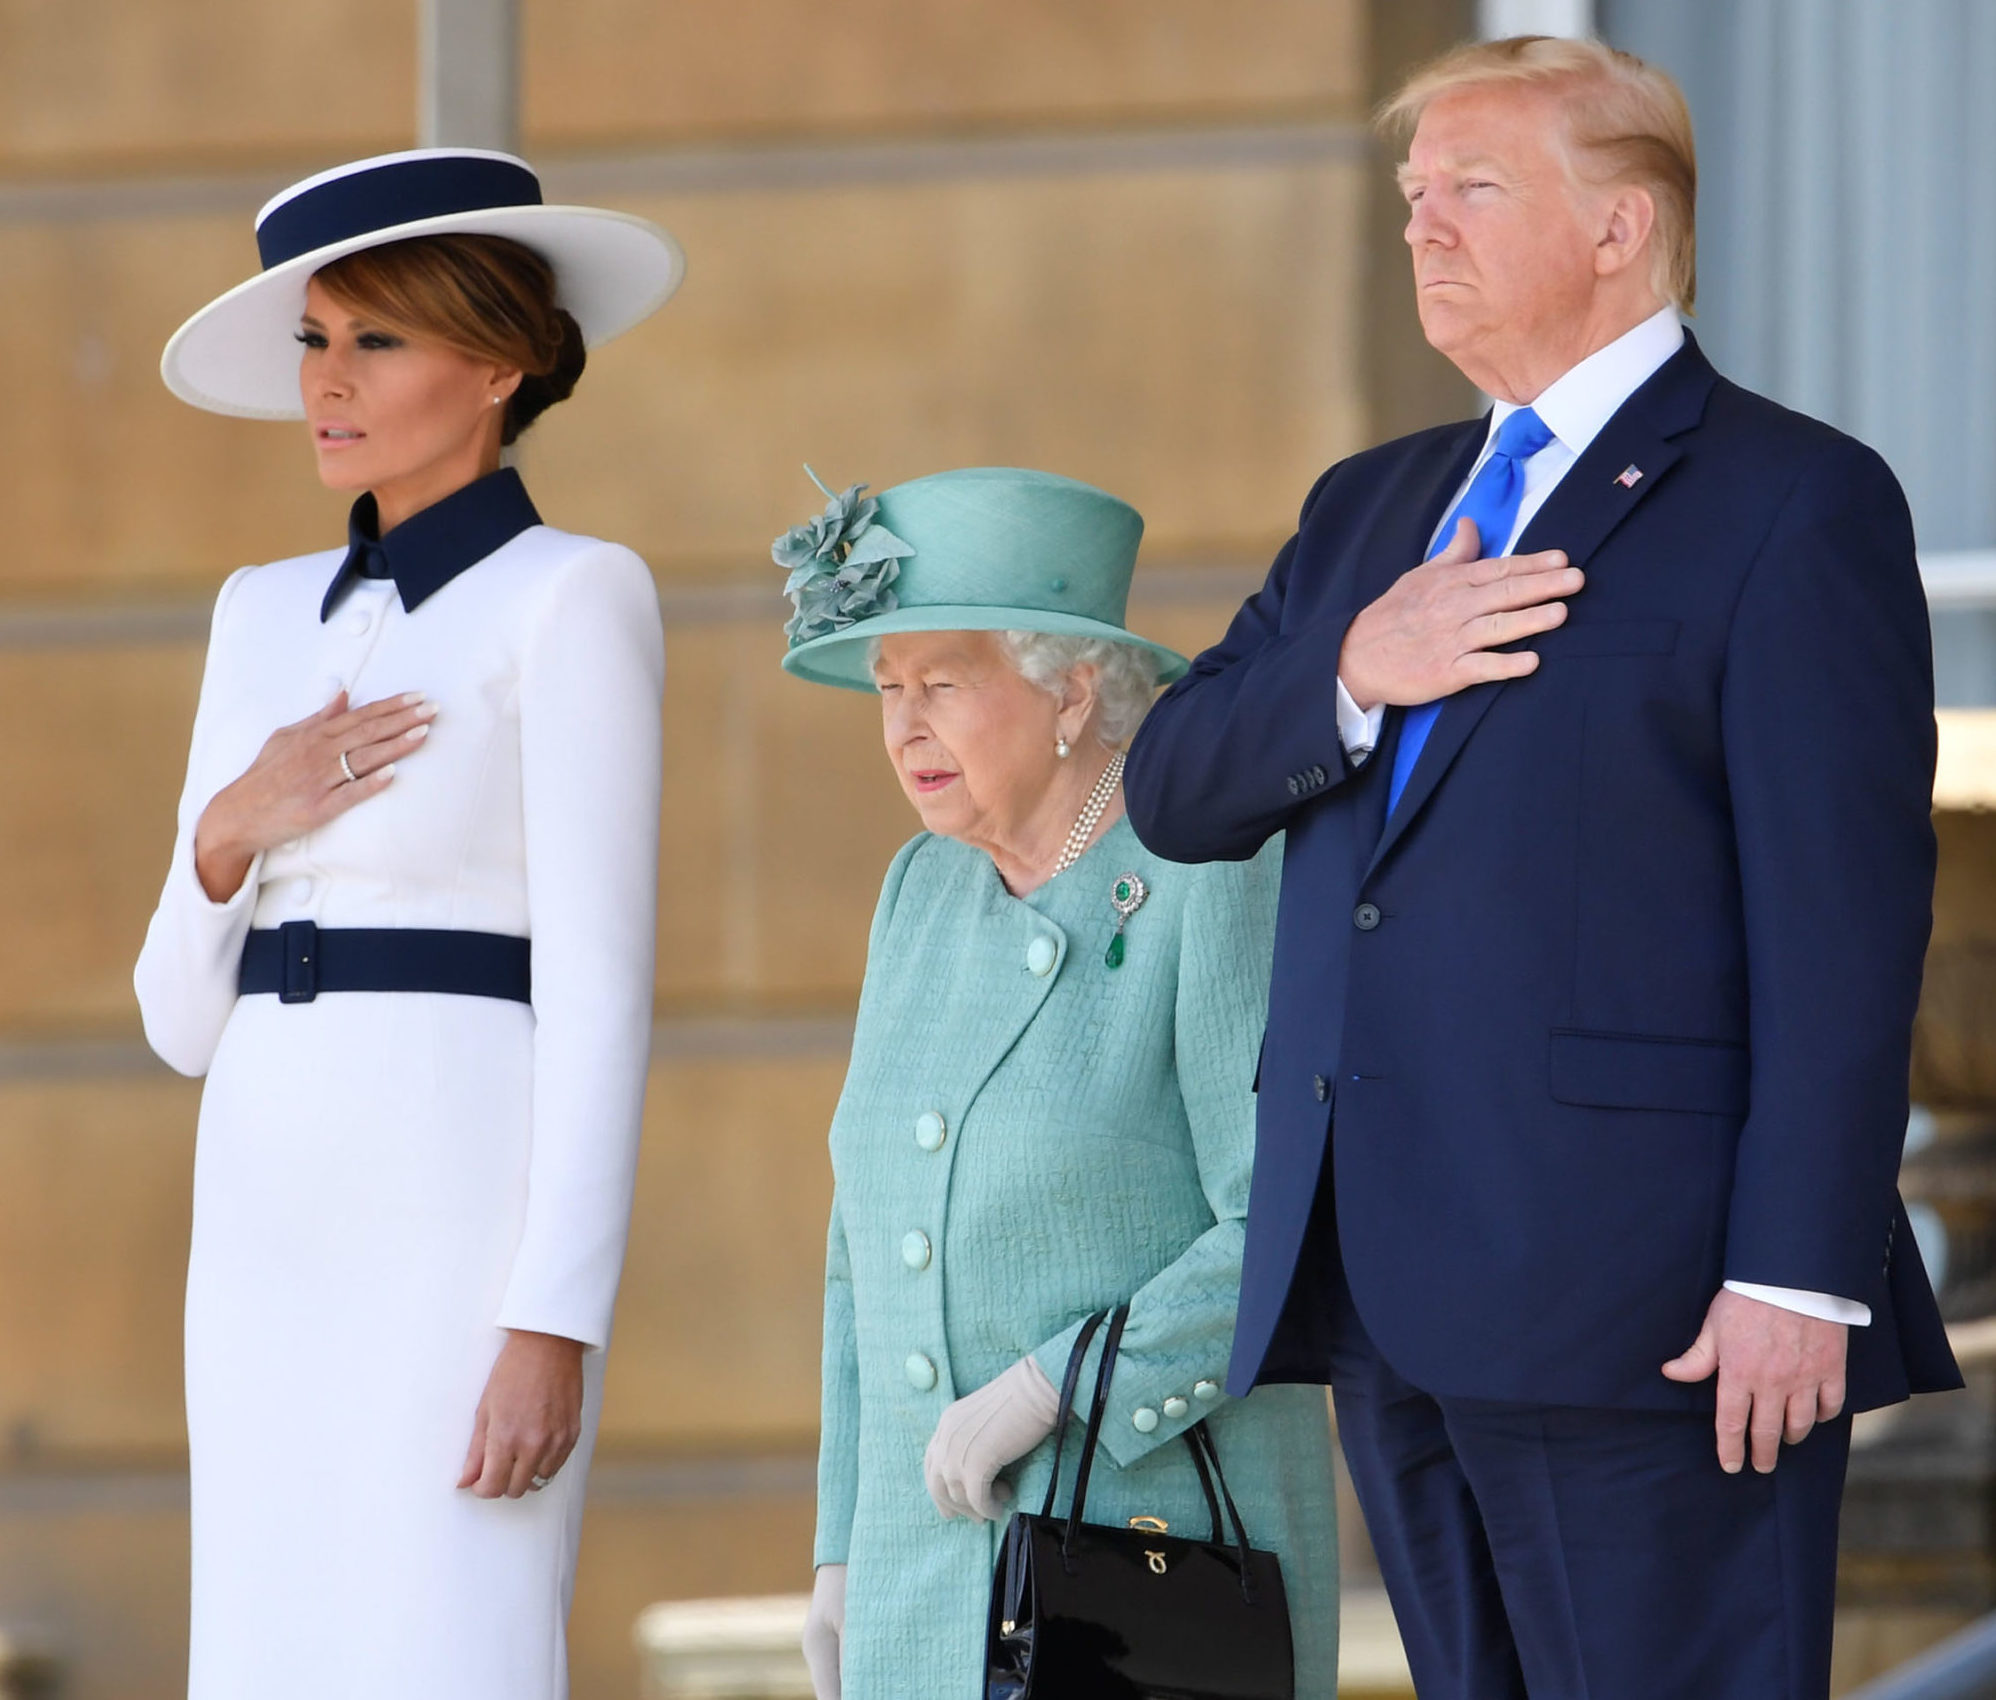 LONDON, ENGLAND - JUNE 03: Queen Elizabeth II stands with US President Donald Trump and US First Lady Melania Trump as they listen to the US national anthem during a welcome ceremony at Buckingham Palace on June 3, 2019 in London, England. (Photo by Toby Melville - WPA Pool/Getty Images)